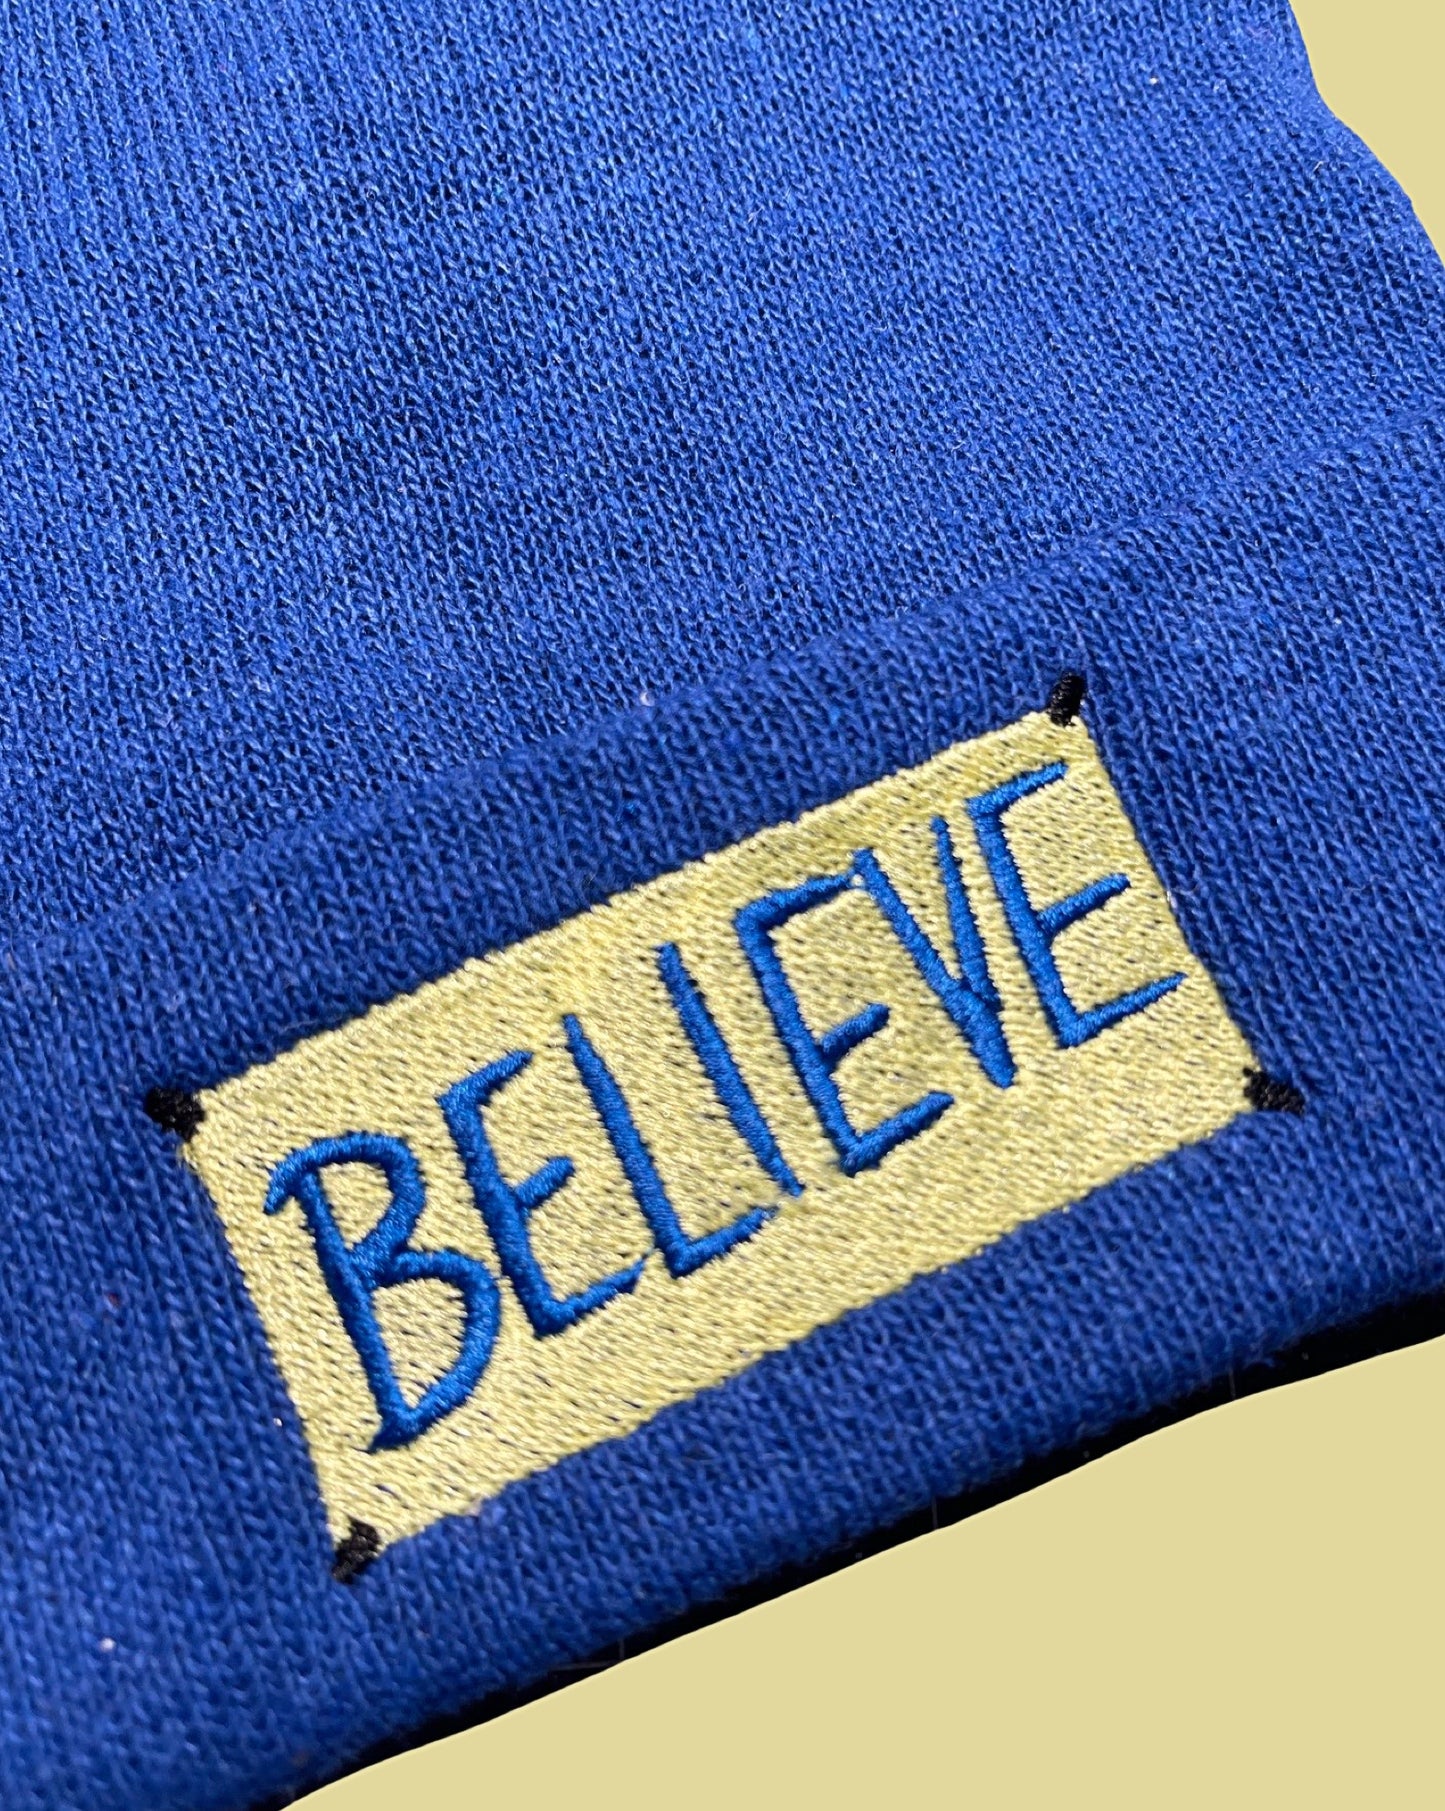 detail view of the embroidered "believe" sign from Ted Lasso on royal blue knit beanie